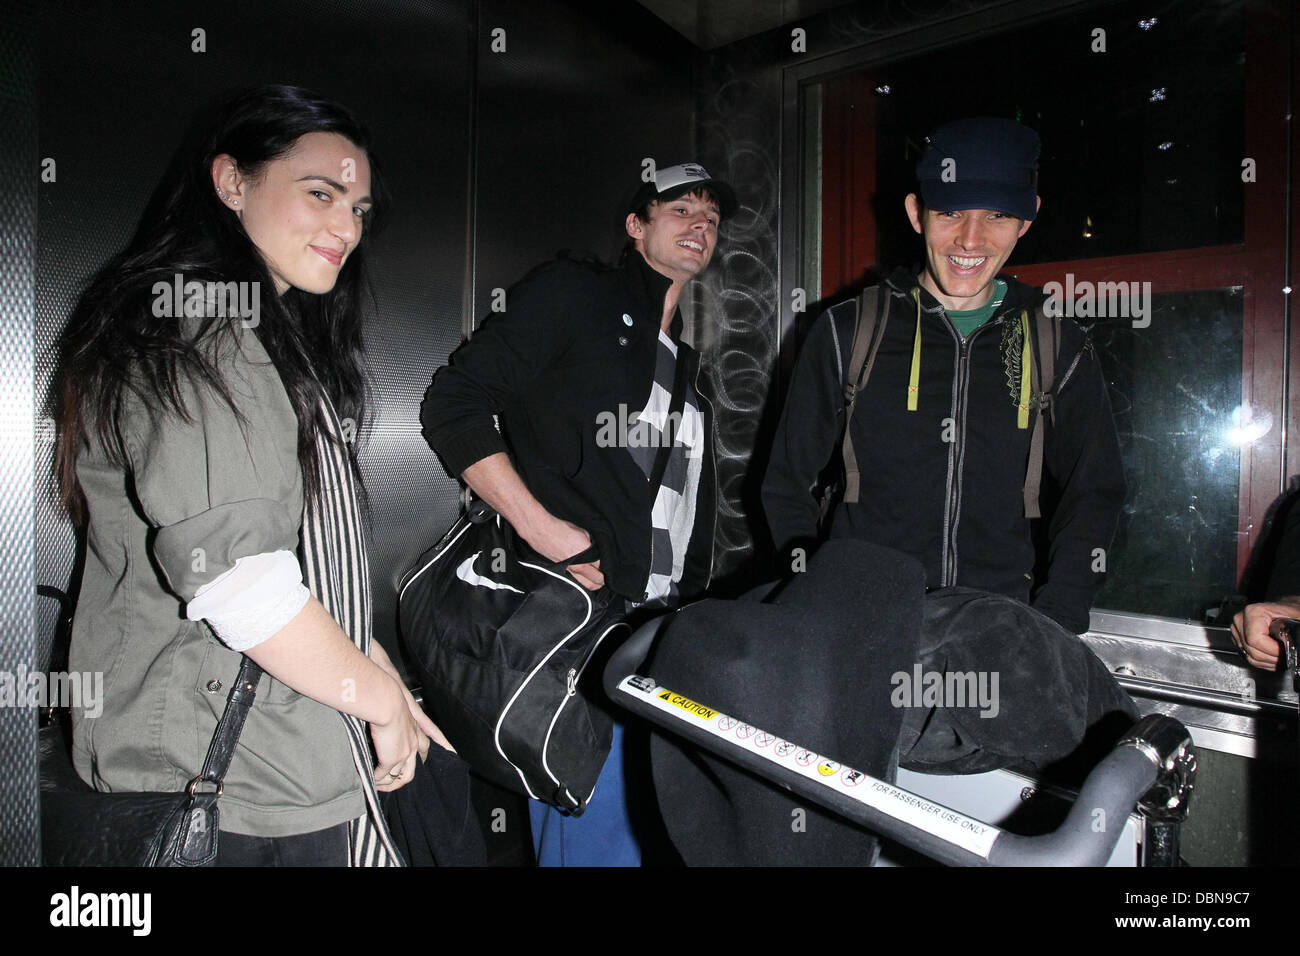 Katie McGrath, Bradley James and Colin Morgan The stars of international smash hit BBC television show 'Merlin' arrive at LAX on a flight from London Heathrow which was delayed over 4 hours from its scheduled arrival time. Los Angeles, California - 24.07.11 Stock Photo